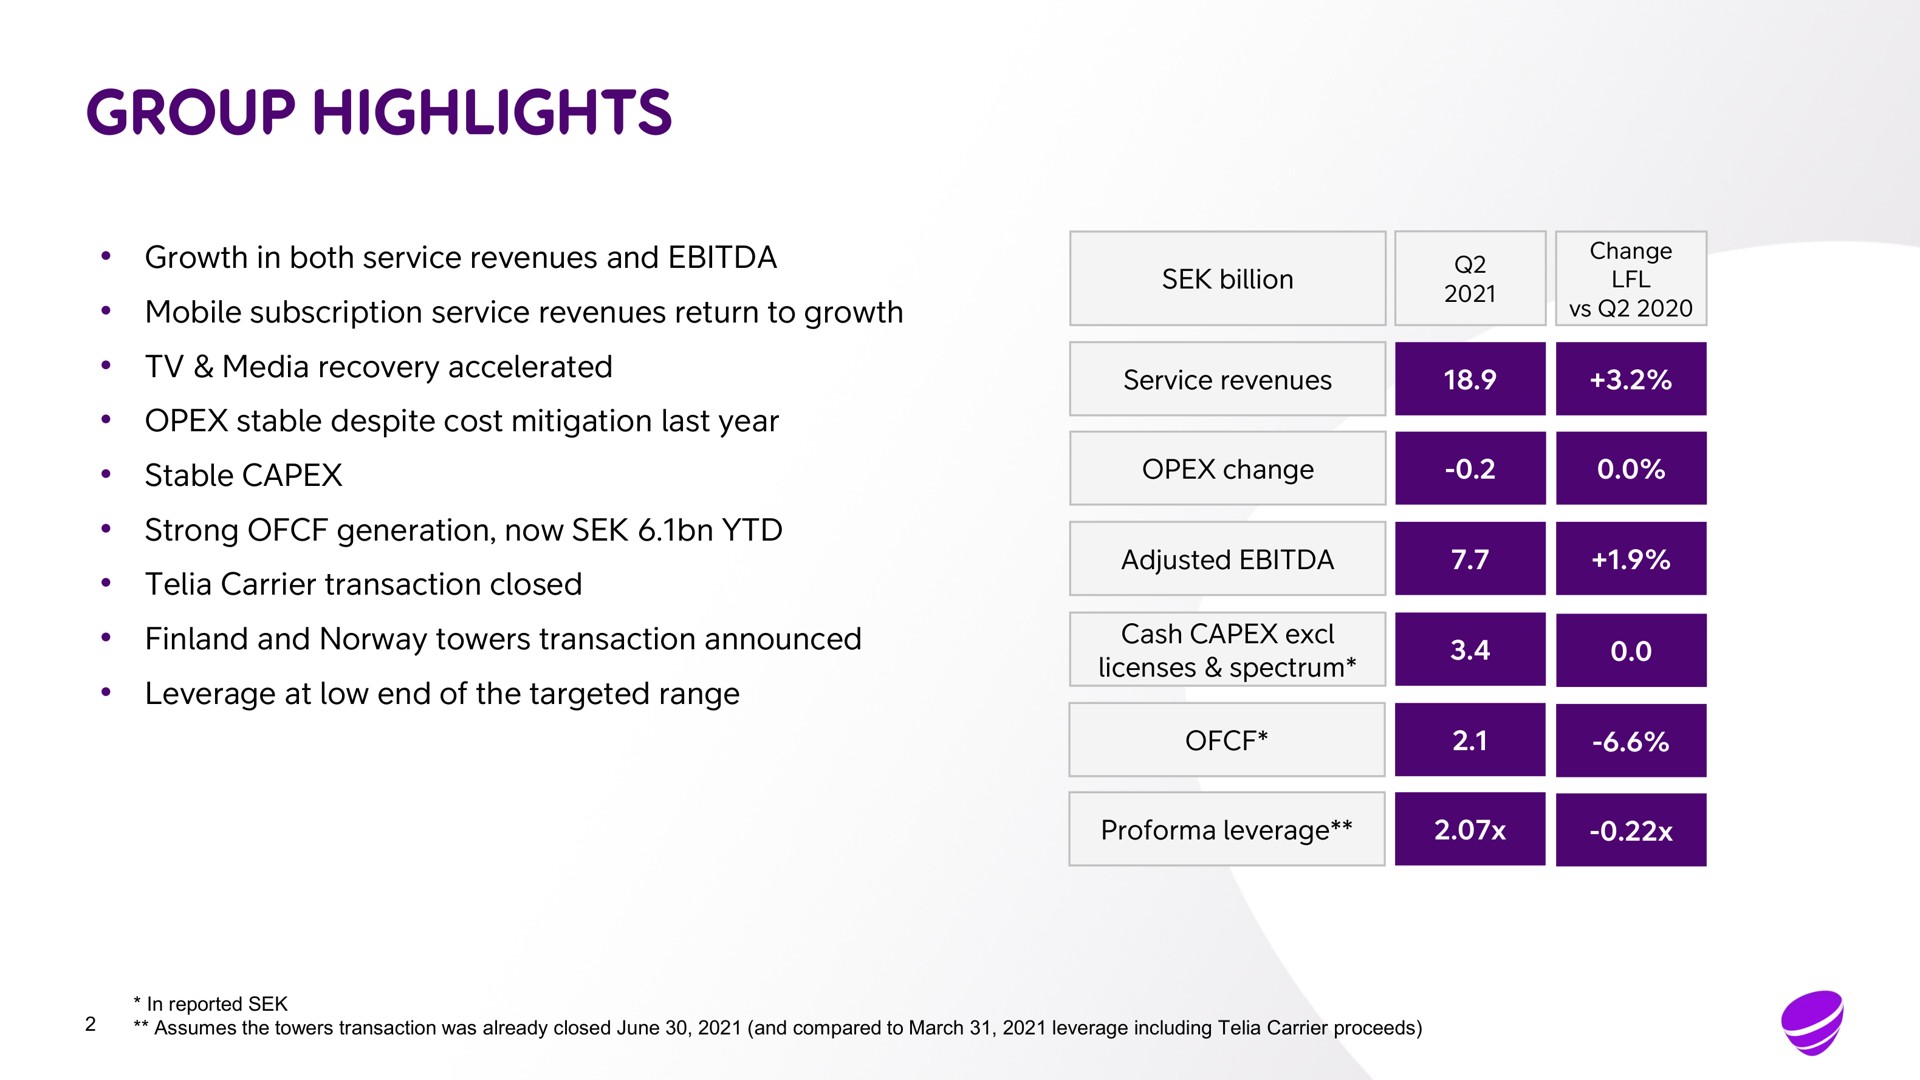 group highlights growth in both service revenues and mobile subscription service revenues return to growth media recovery accelerated stable despite cost mitigation last year stable strong generation now carrier transaction closed finland and towers transaction announced leverage at low end of the targeted range billion service revenues change adjusted cash licenses spectrum leverage | Telia Company